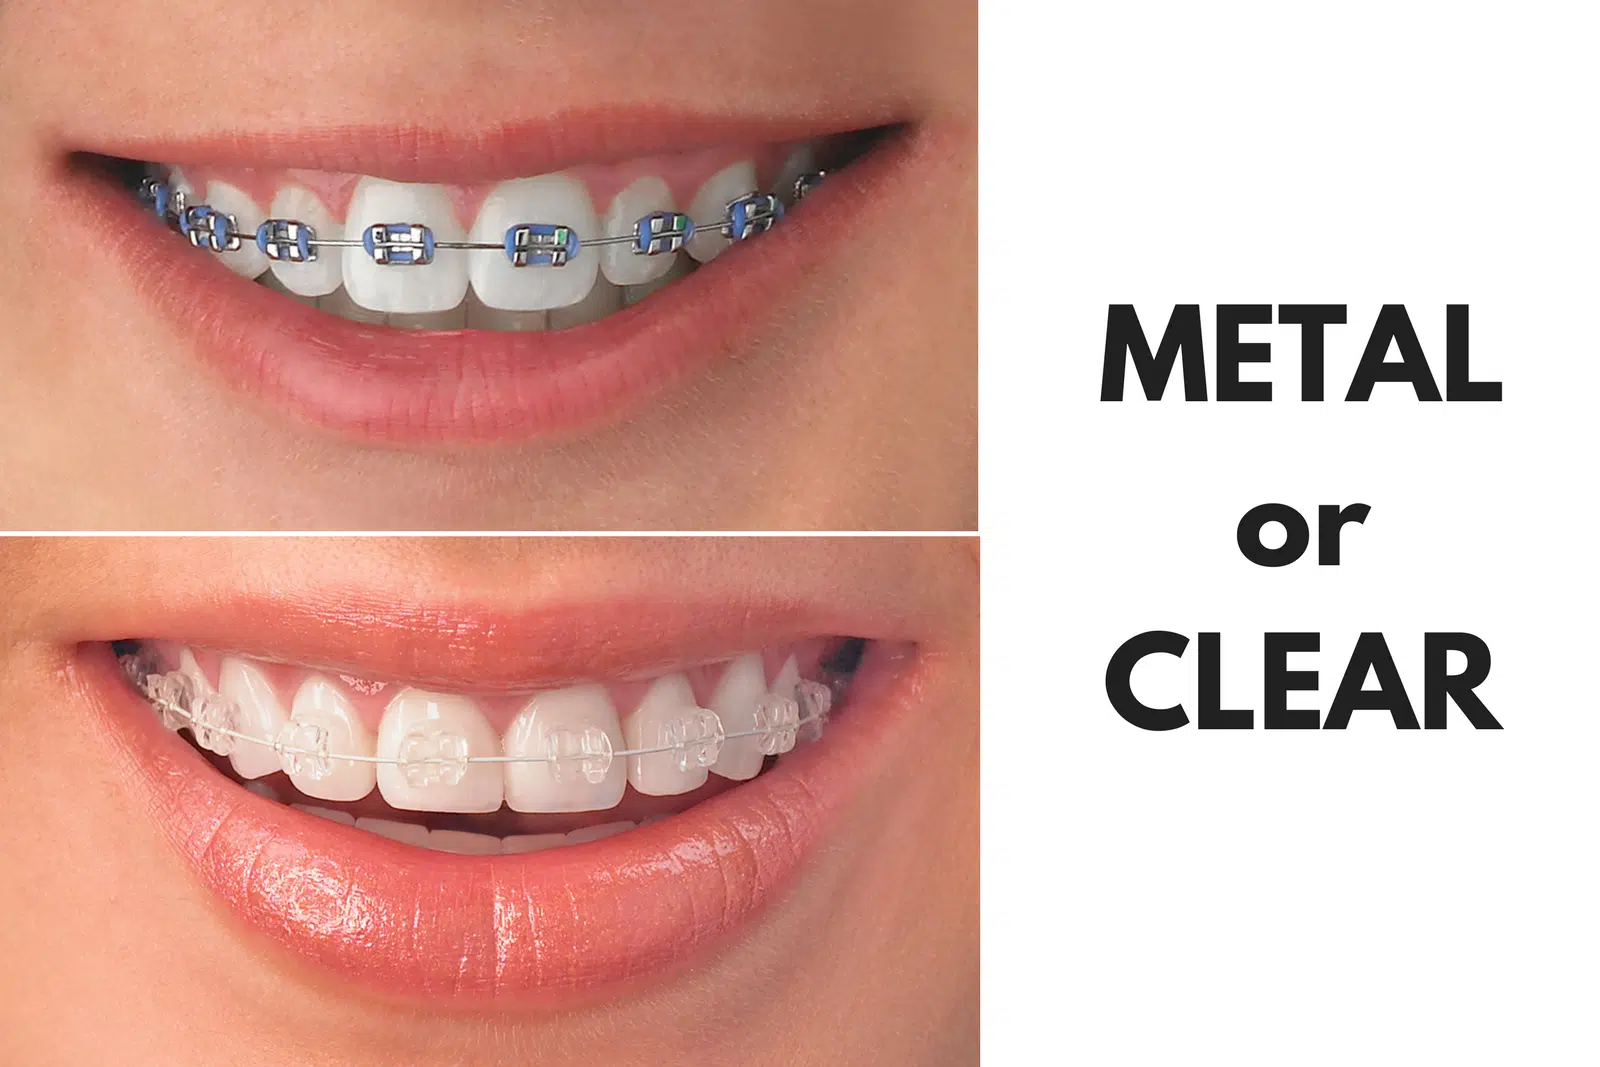 Ask Your Wichita Falls Dentist: Should I Get Metal or Clear Braces